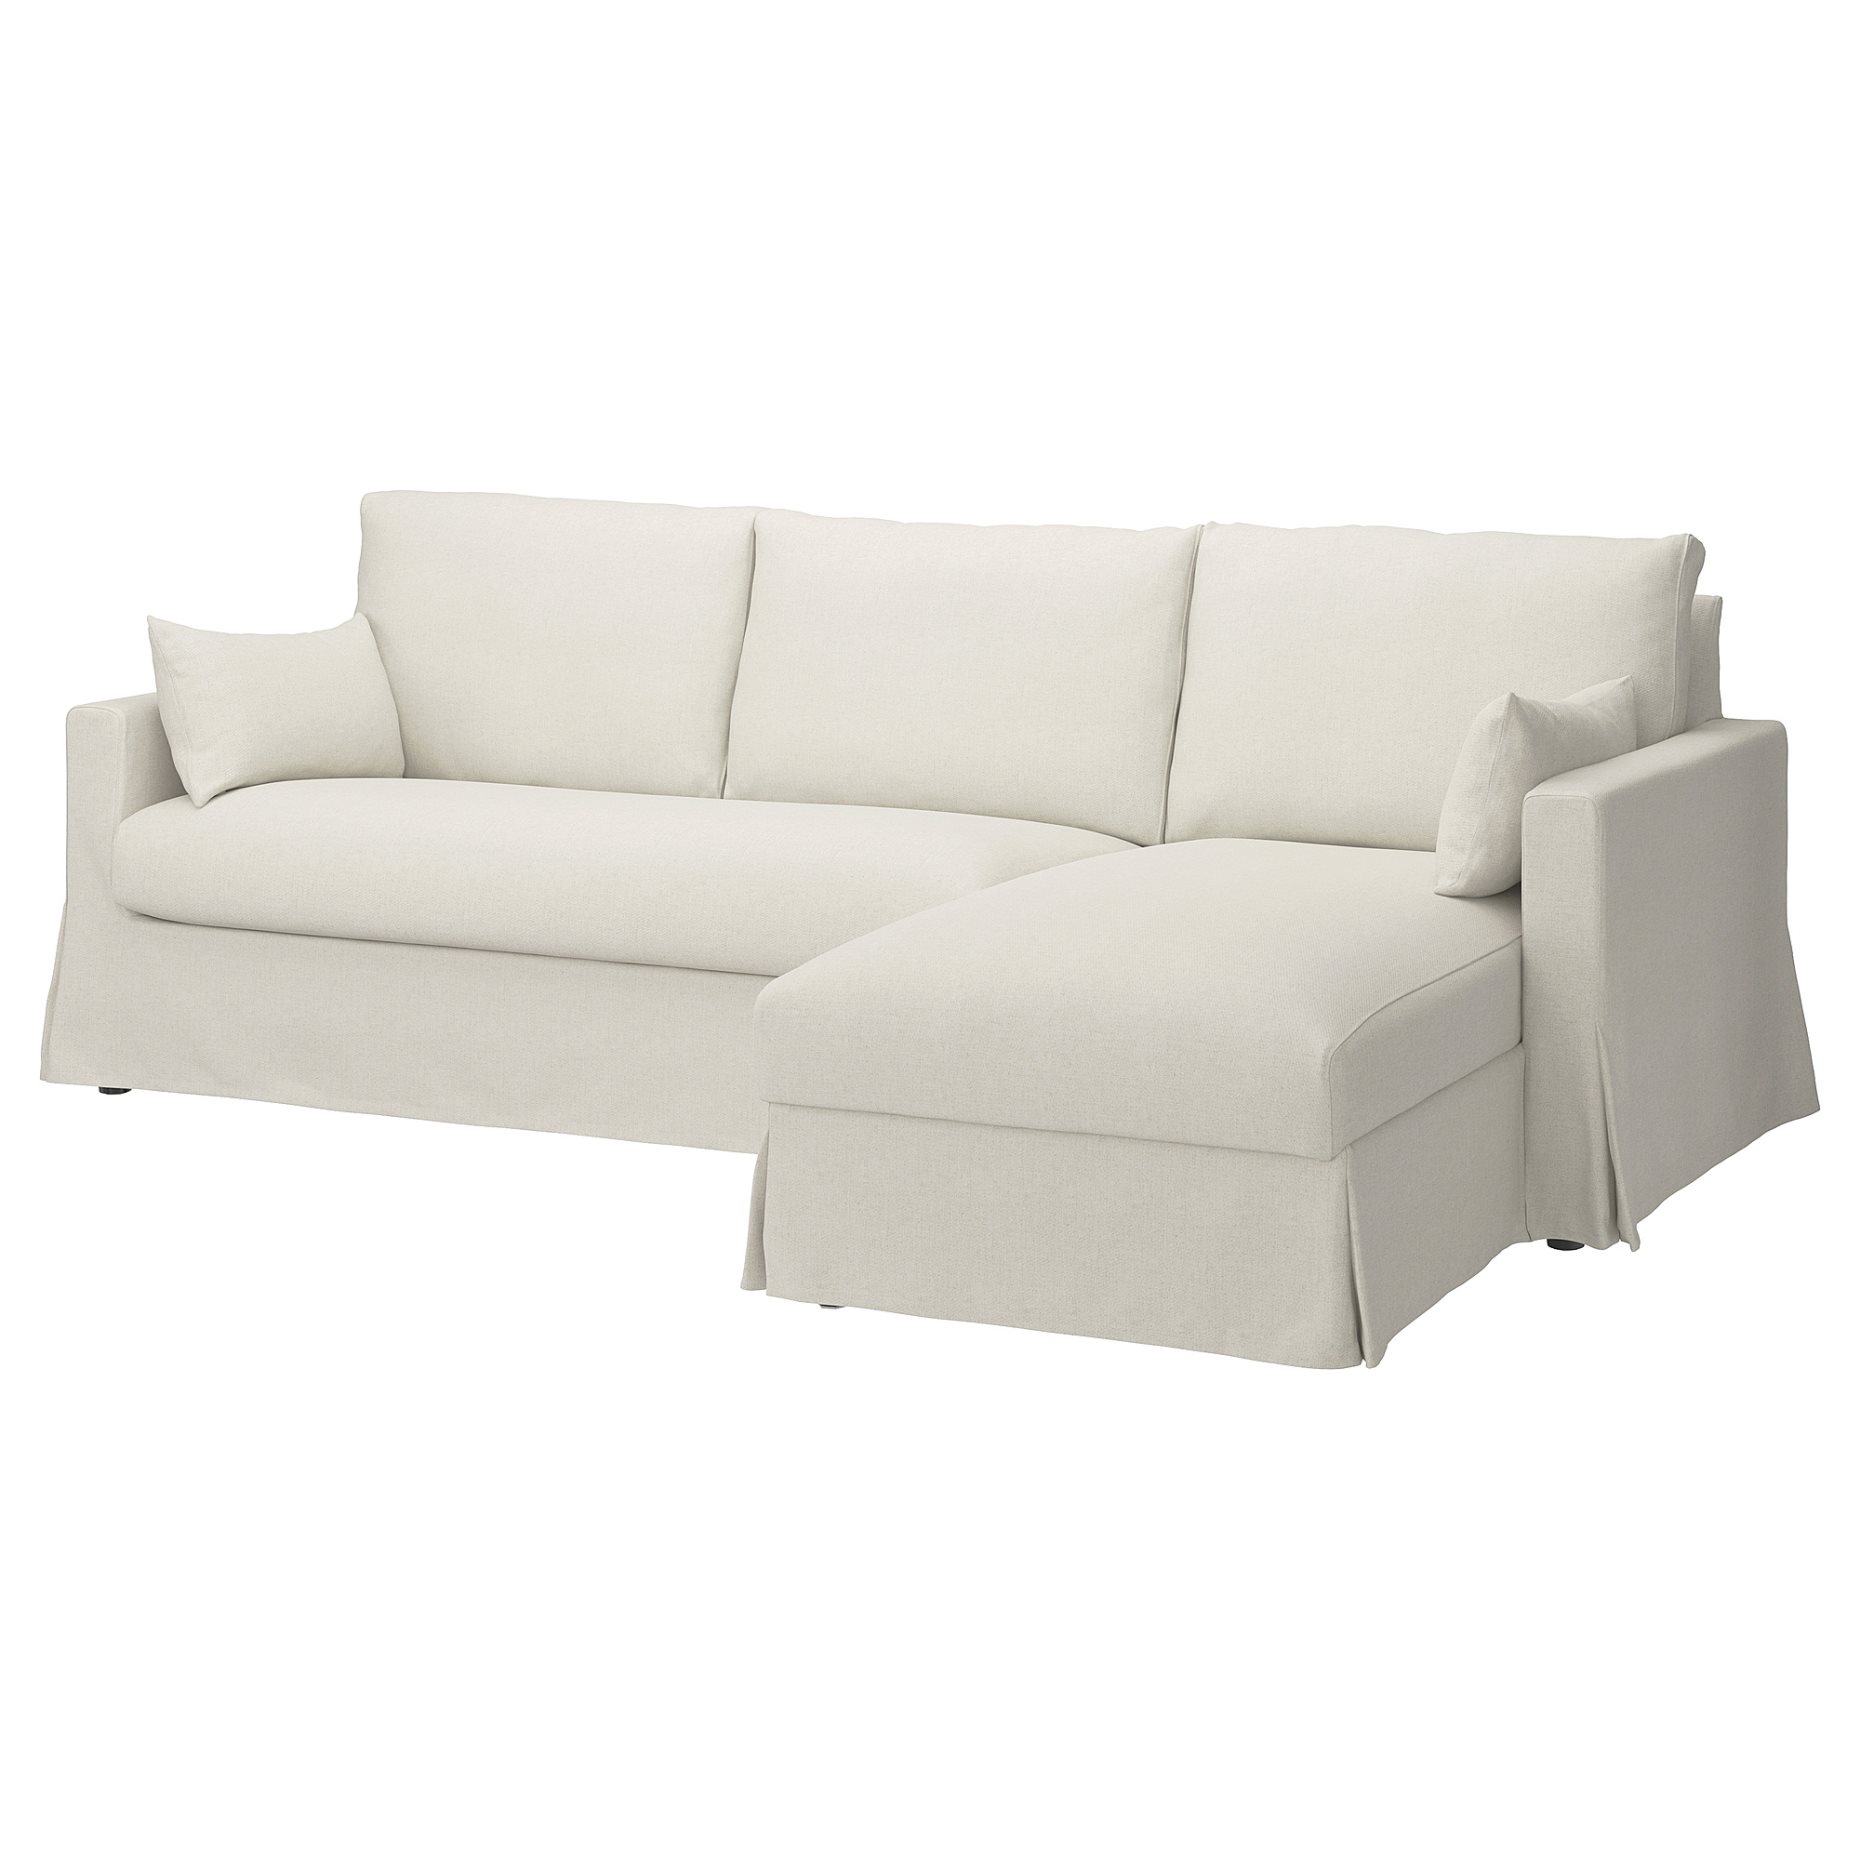 HYLTARP, cover f 3-seat sofa with chaise long, right, 205.473.63